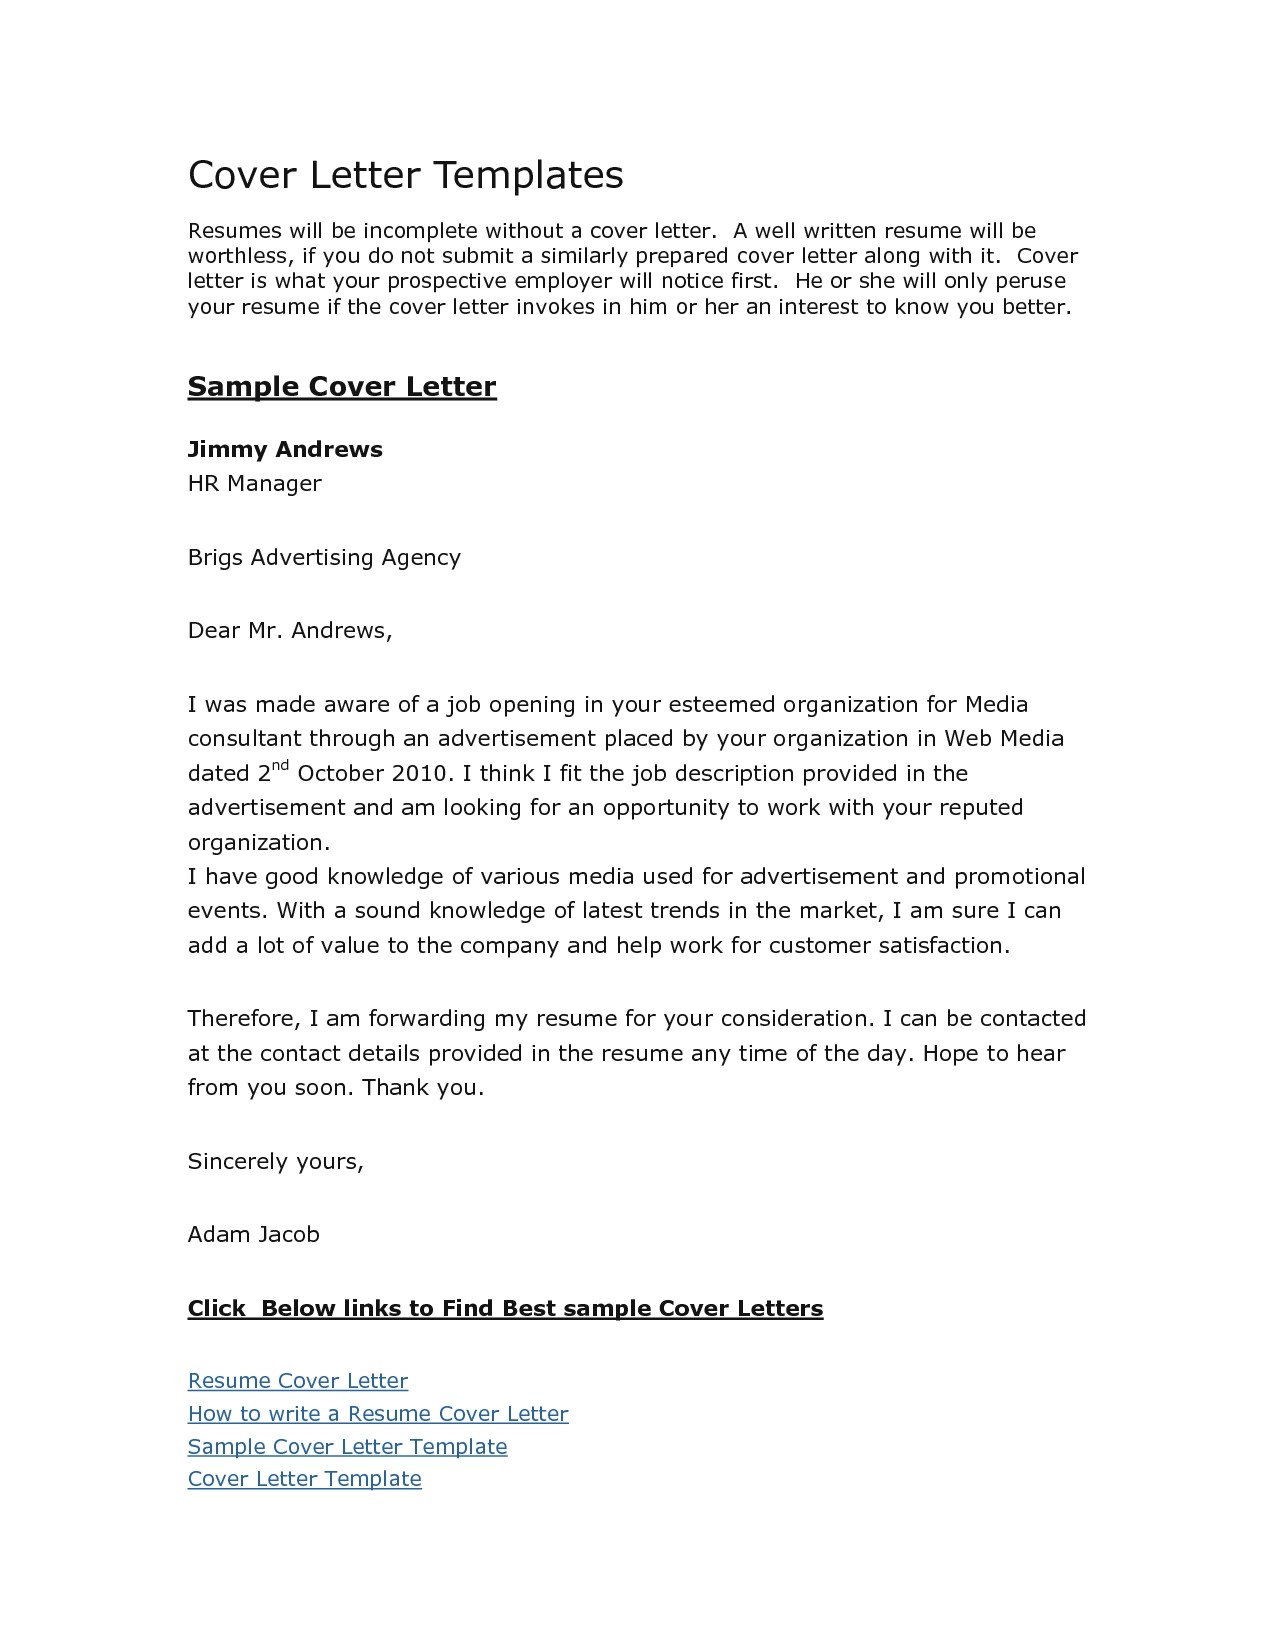 cover letters templates free